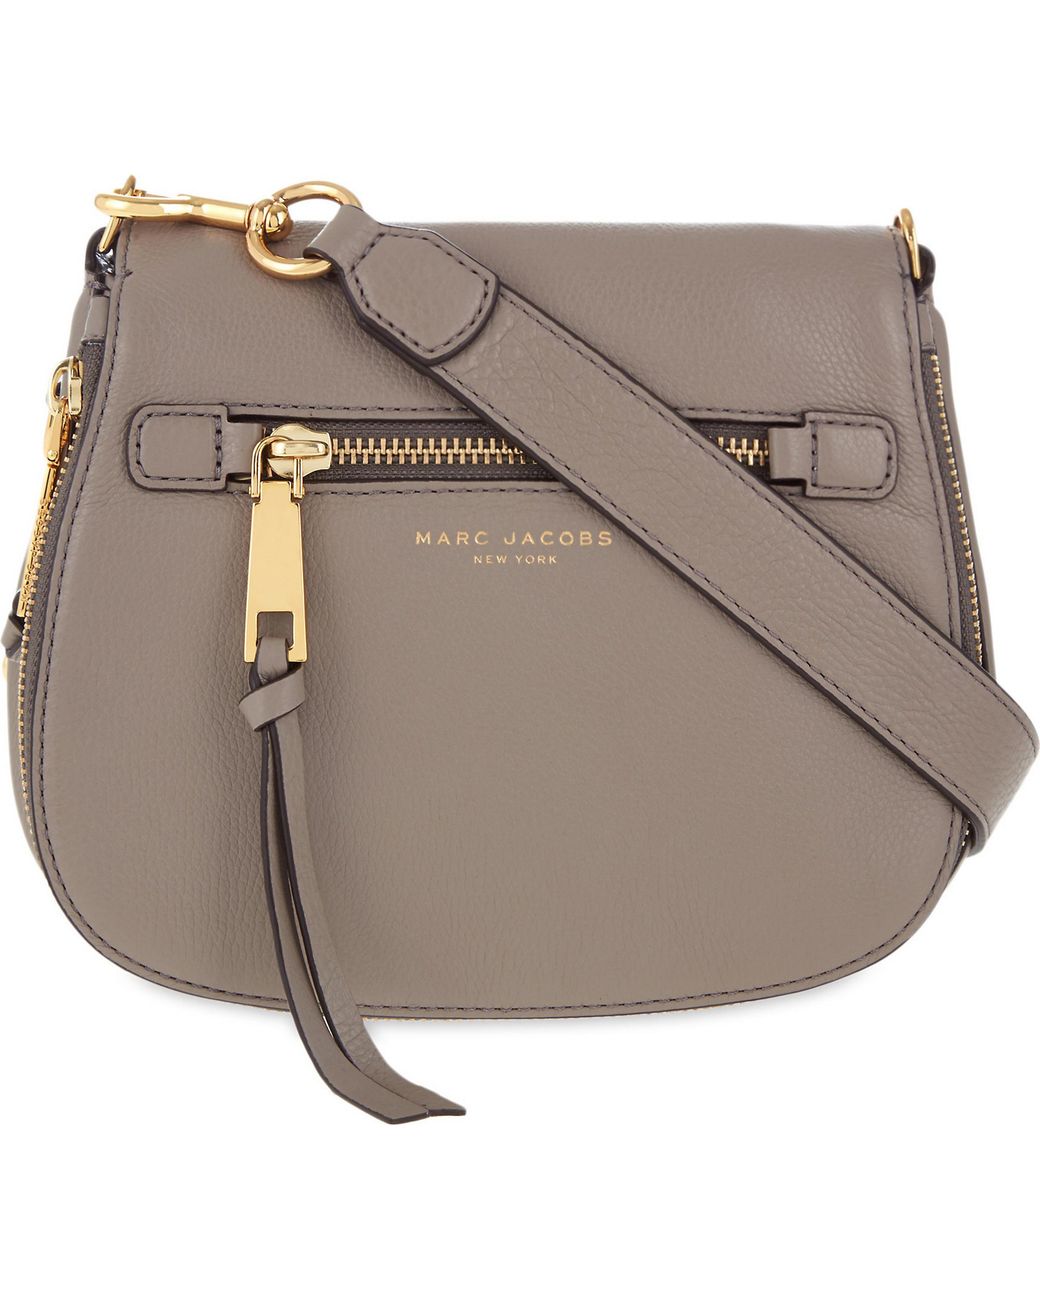 Marc Jacobs Mink Recruit Grained Leather Saddle Bag in Gray | Lyst